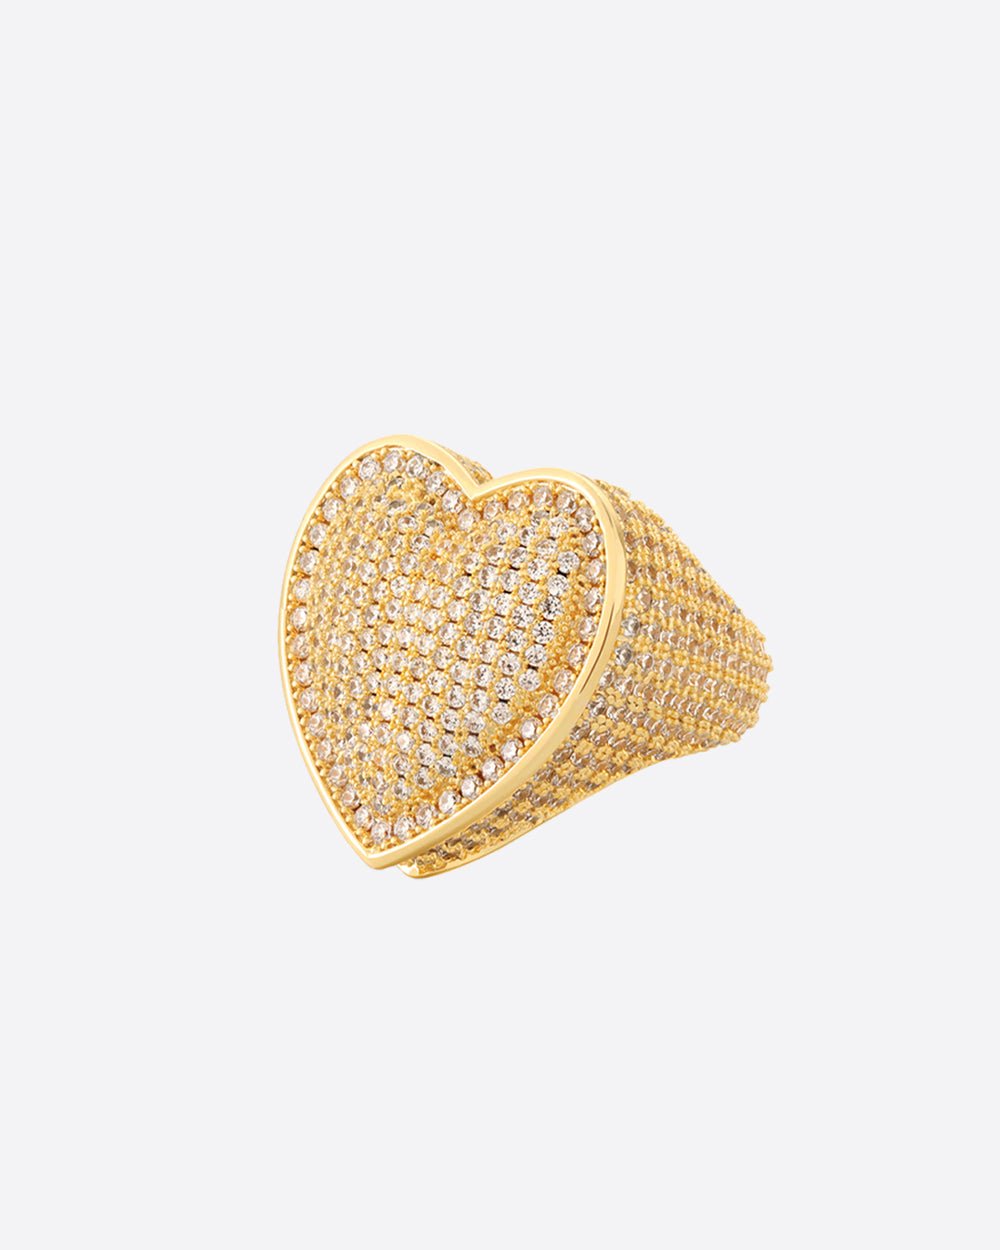 ICY PAVED HEART RING. - 18K GOLD - Drippy Amsterdam